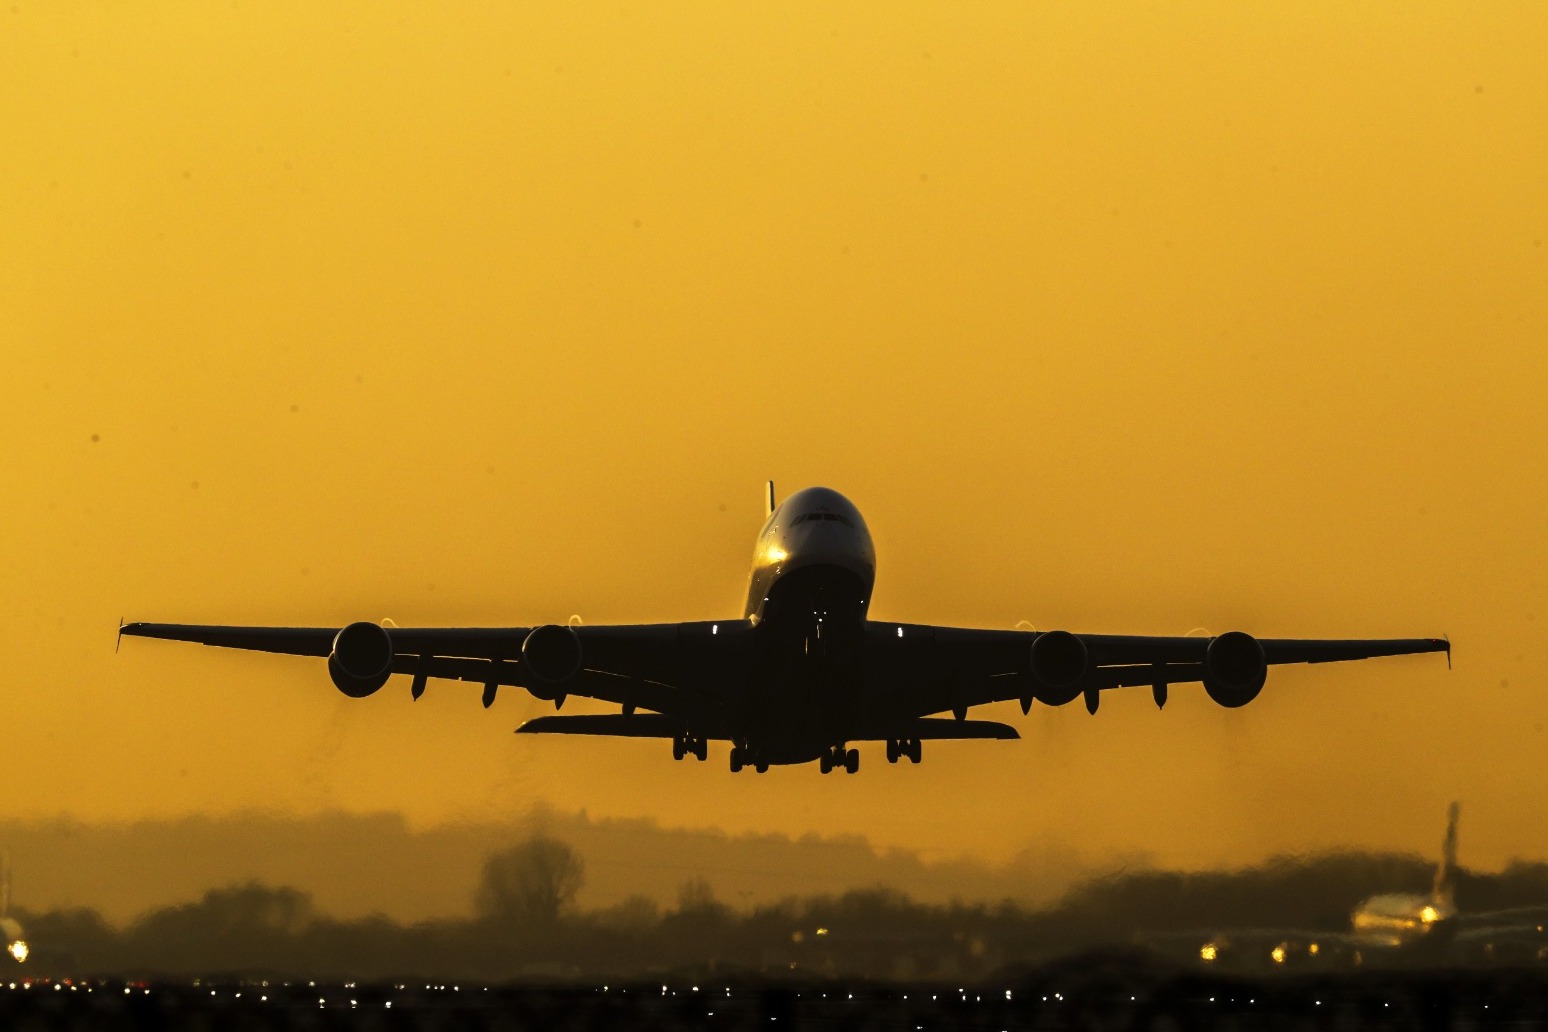 Heathrow to ask for more flight cancellations if chaos continues 